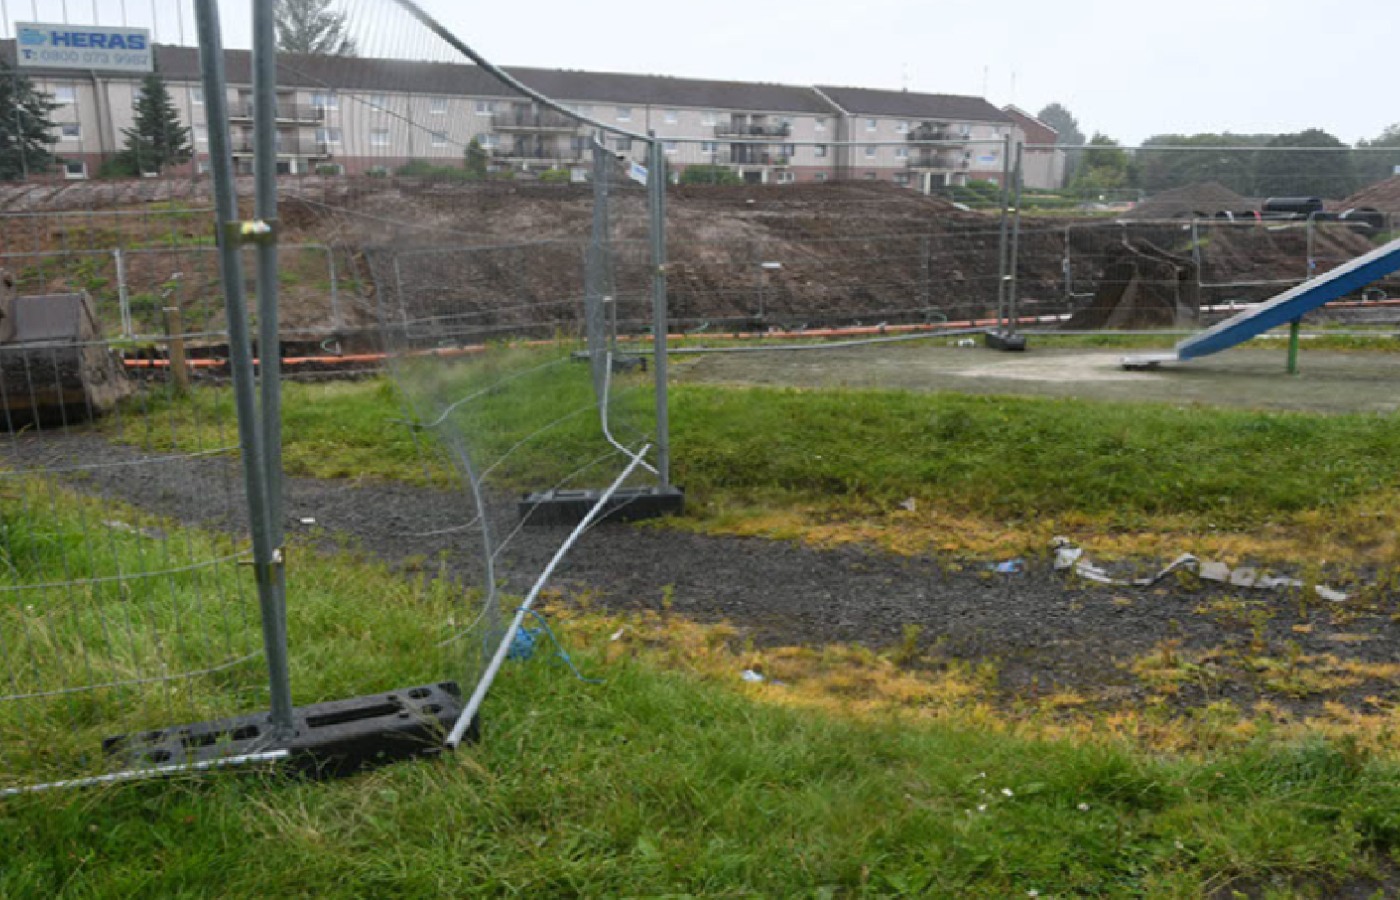 The firm was found to have failed to properly secure the site near a children's park. (Image: HSE)